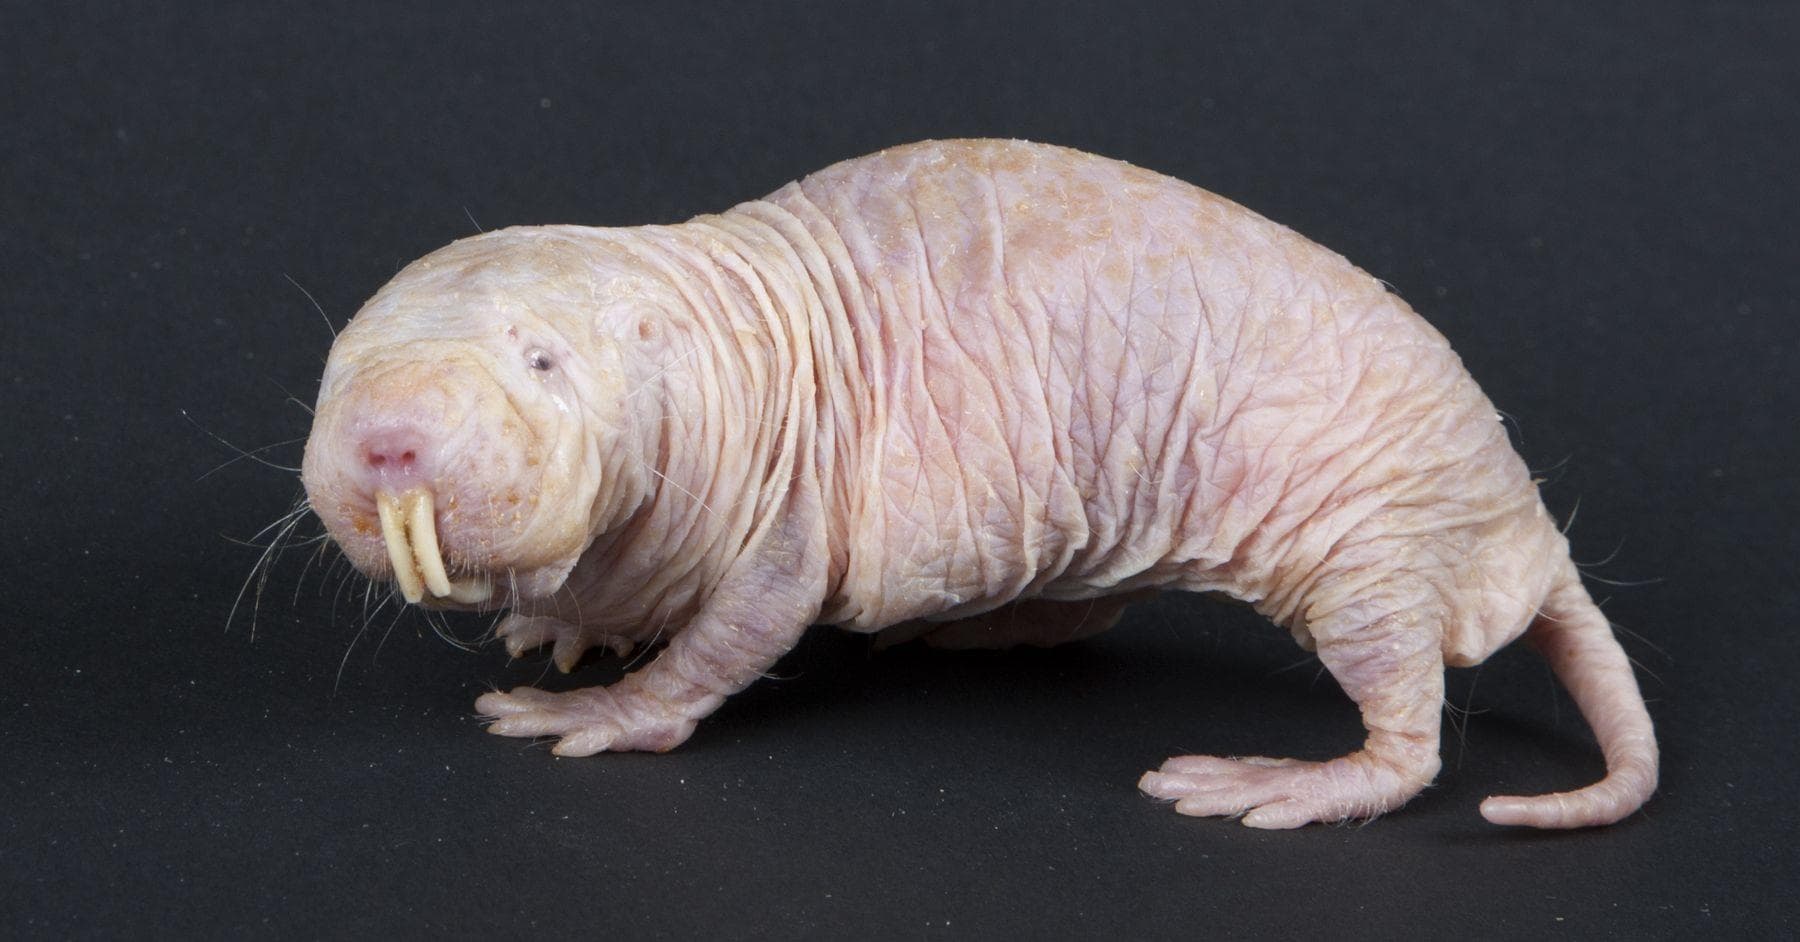 7 Disgusting Hairless Animal Photos You Can't Look Away From